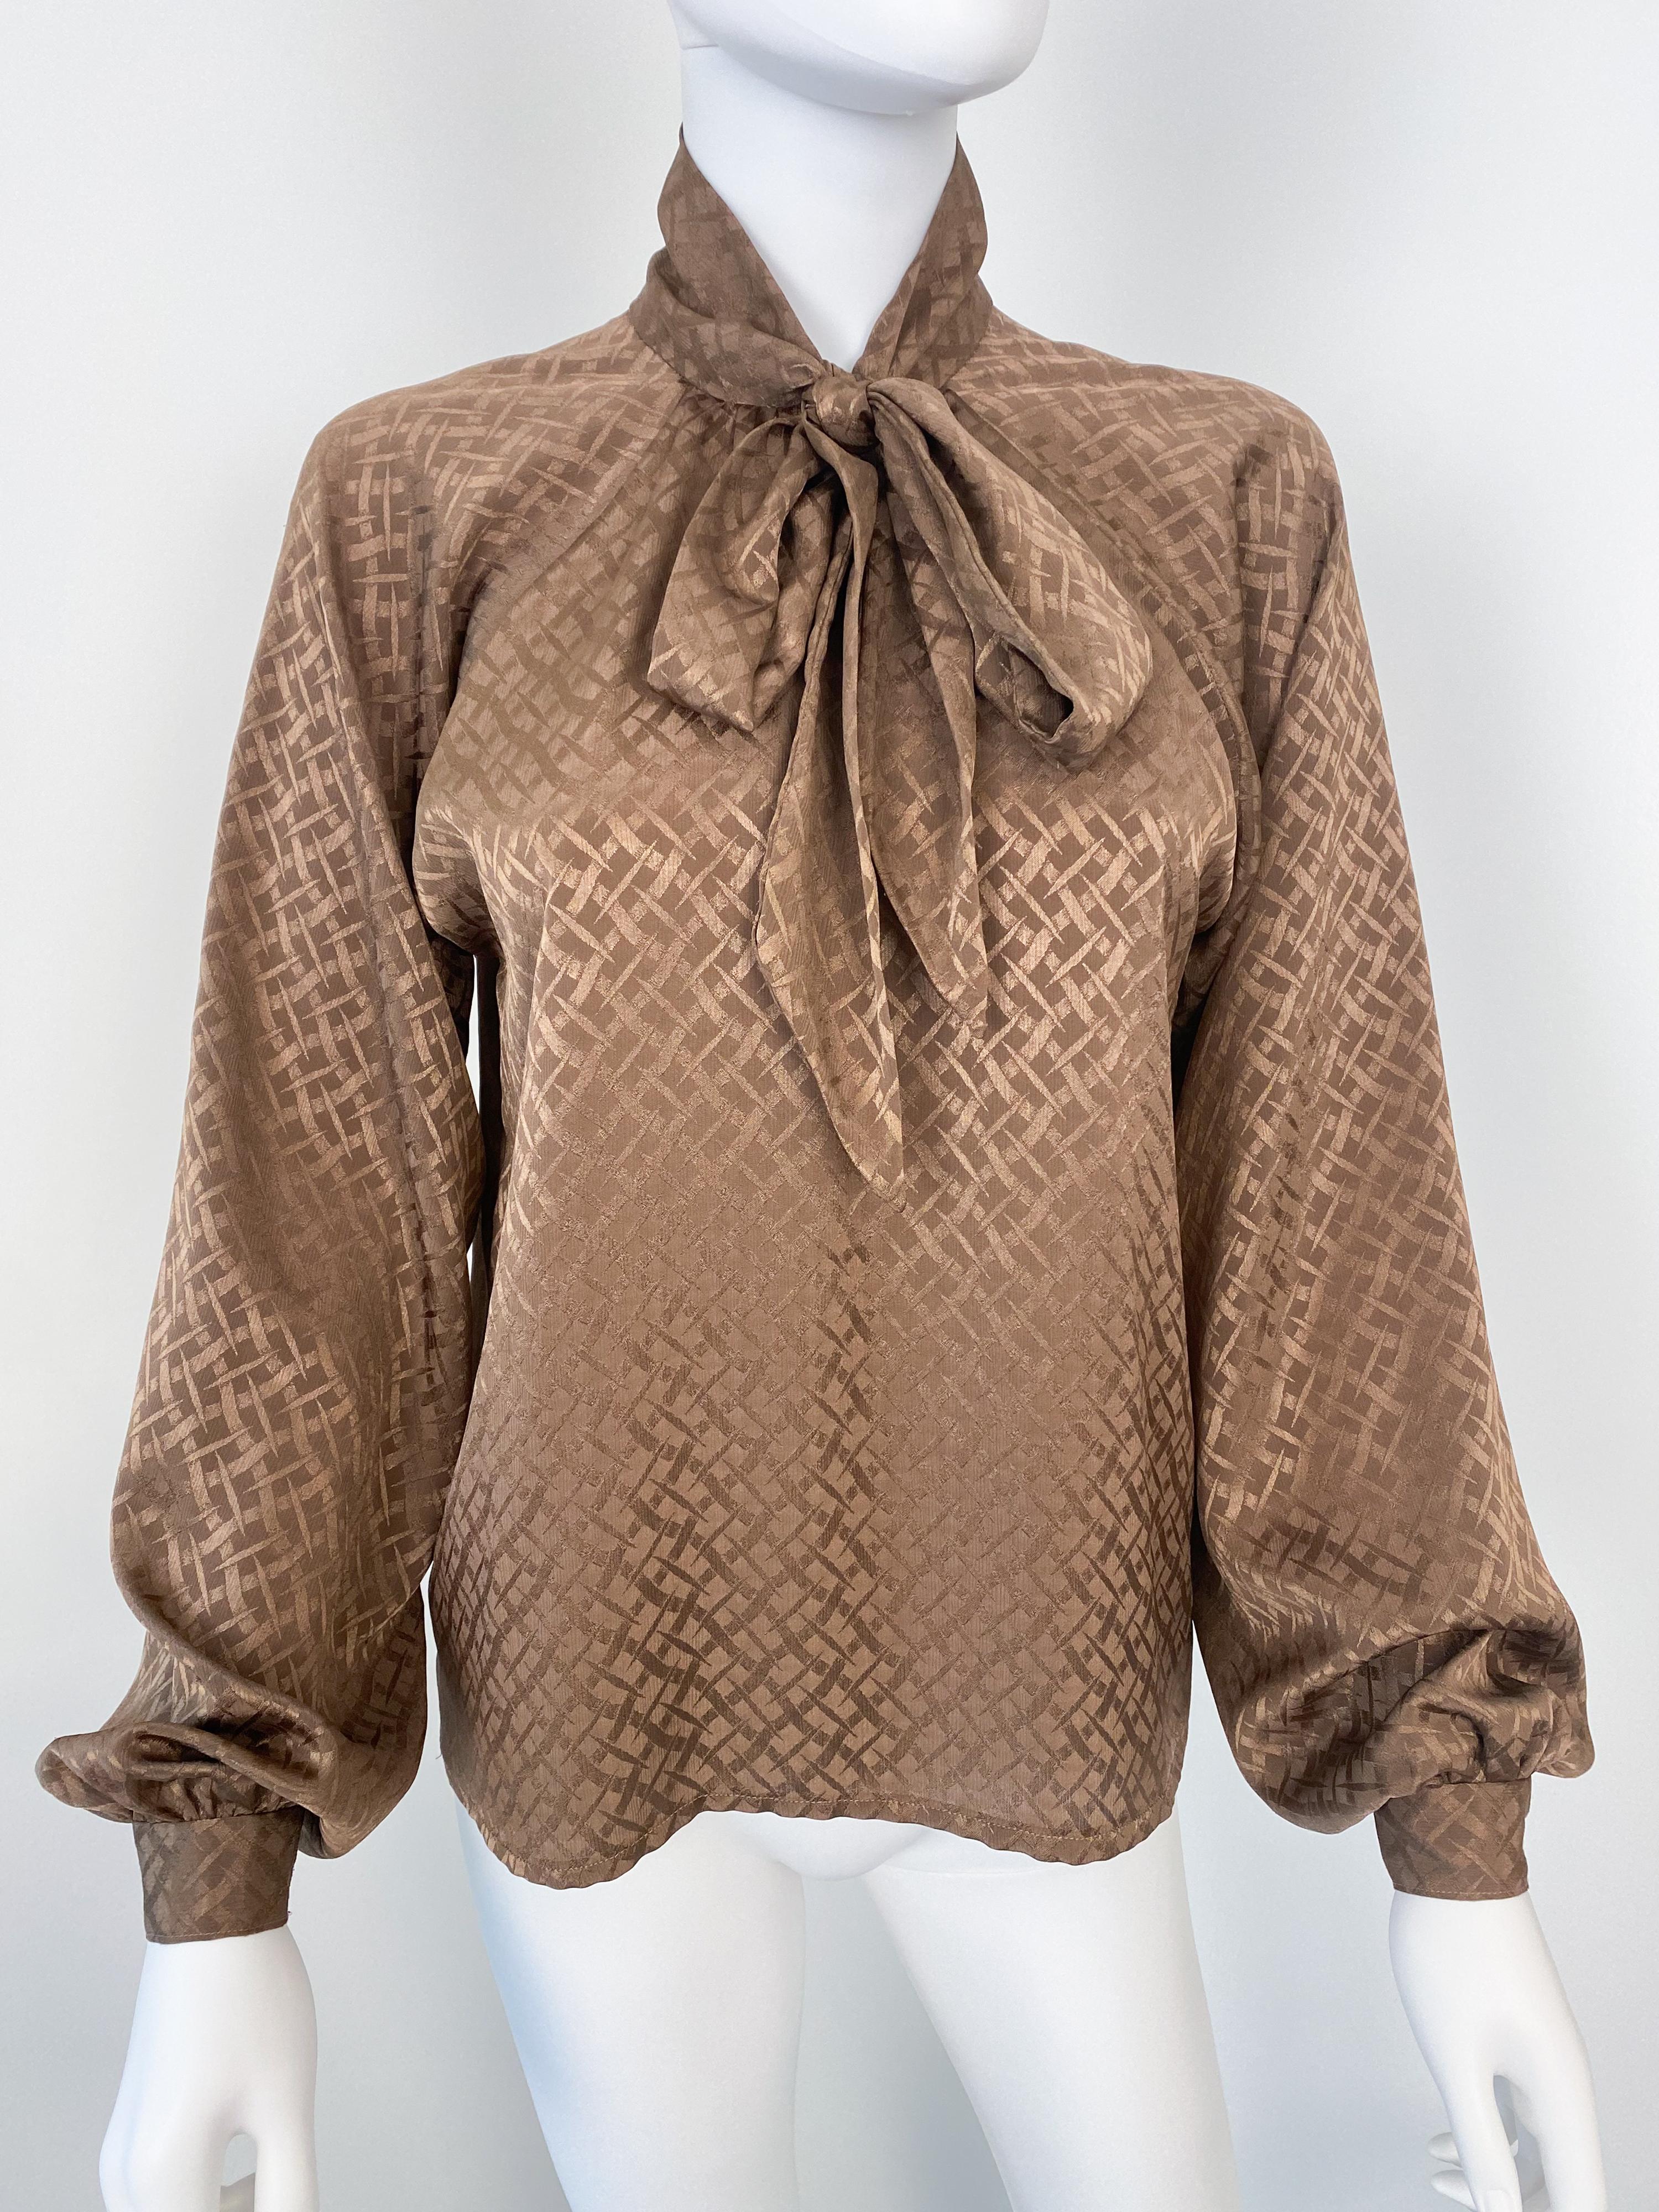 Vintage 1980s Silky Polyester Bow Blouse Top Brown Geometric Print Size 6/8 For Sale 5